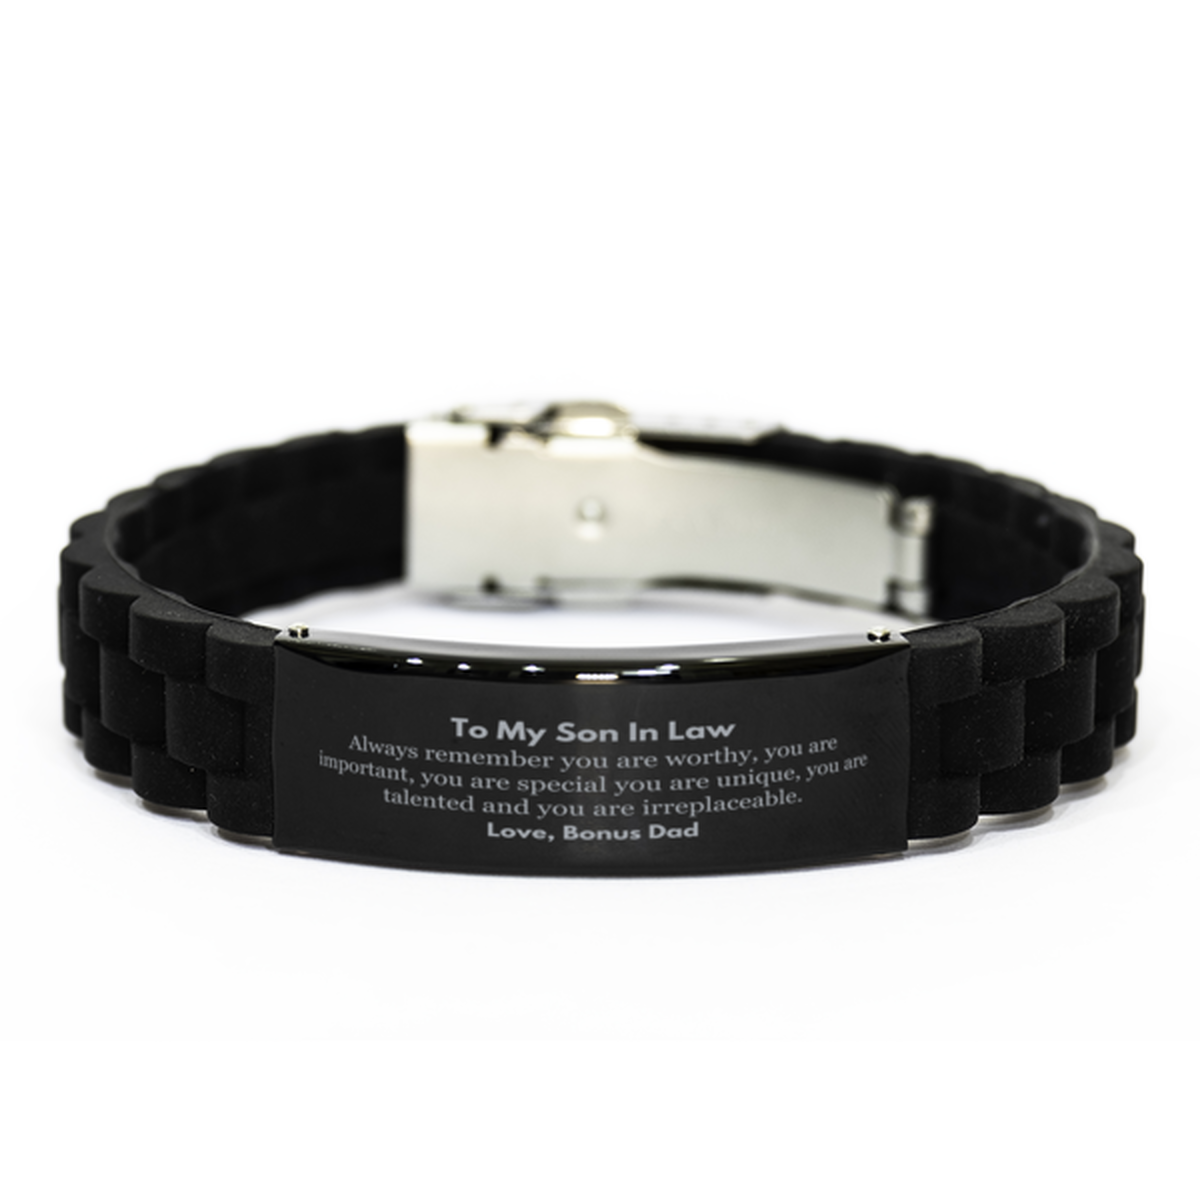 Son In Law Birthday Gifts from Bonus Dad, Inspirational Black Glidelock Clasp Bracelet for Son In Law Christmas Graduation Gifts for Son In Law Always remember you are worthy, you are important. Love, Bonus Dad